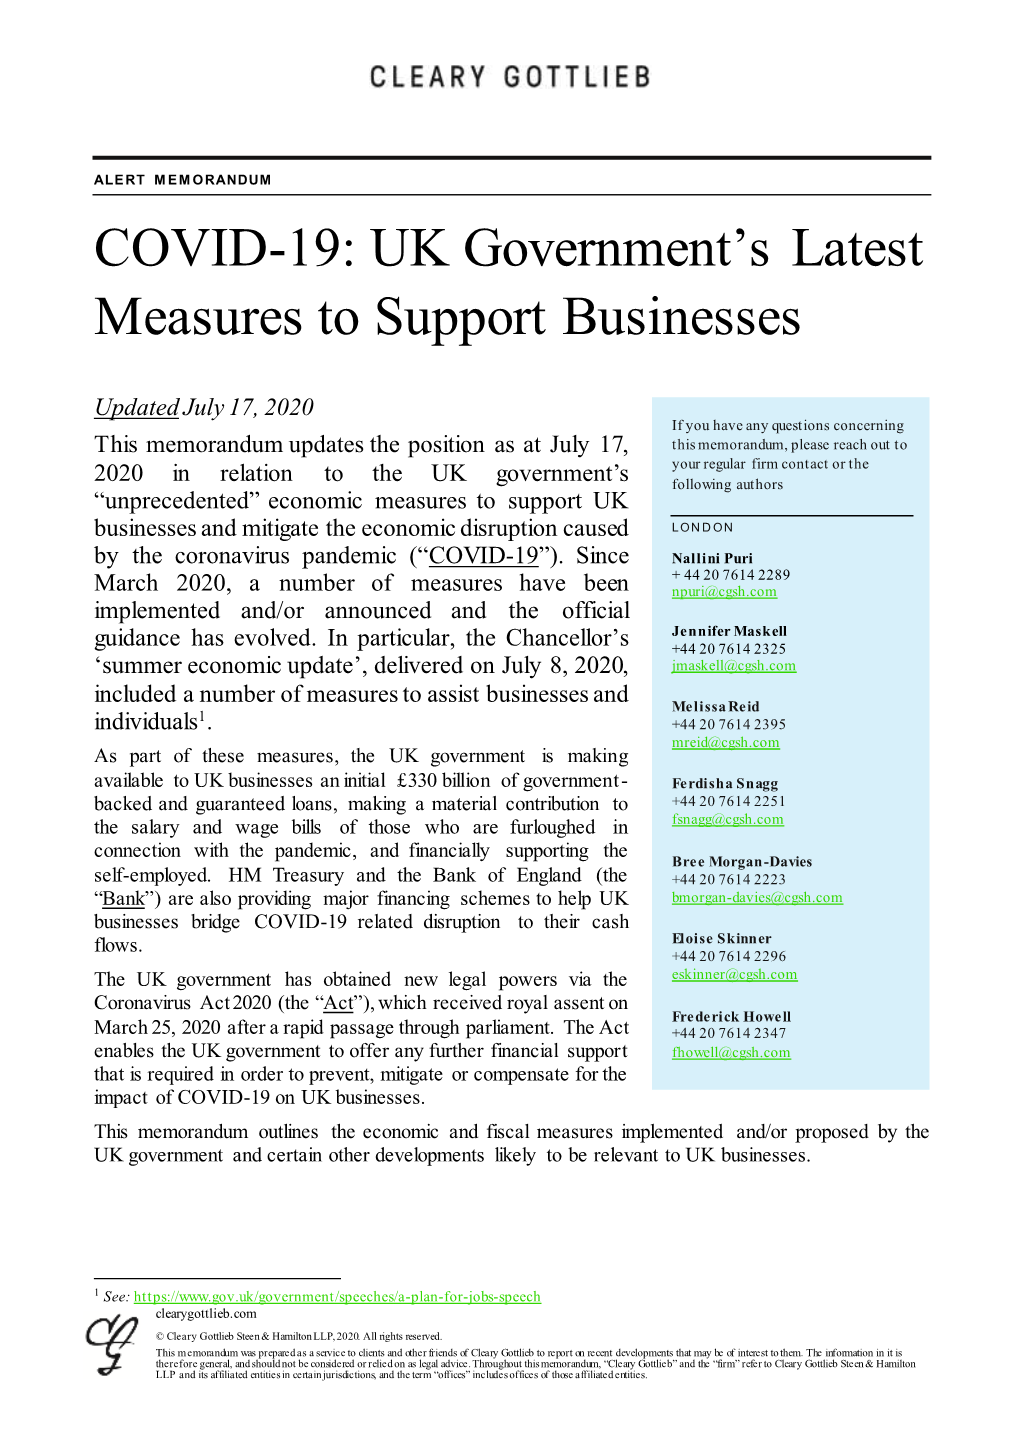 COVID-19: UK Government's Latest Measures To